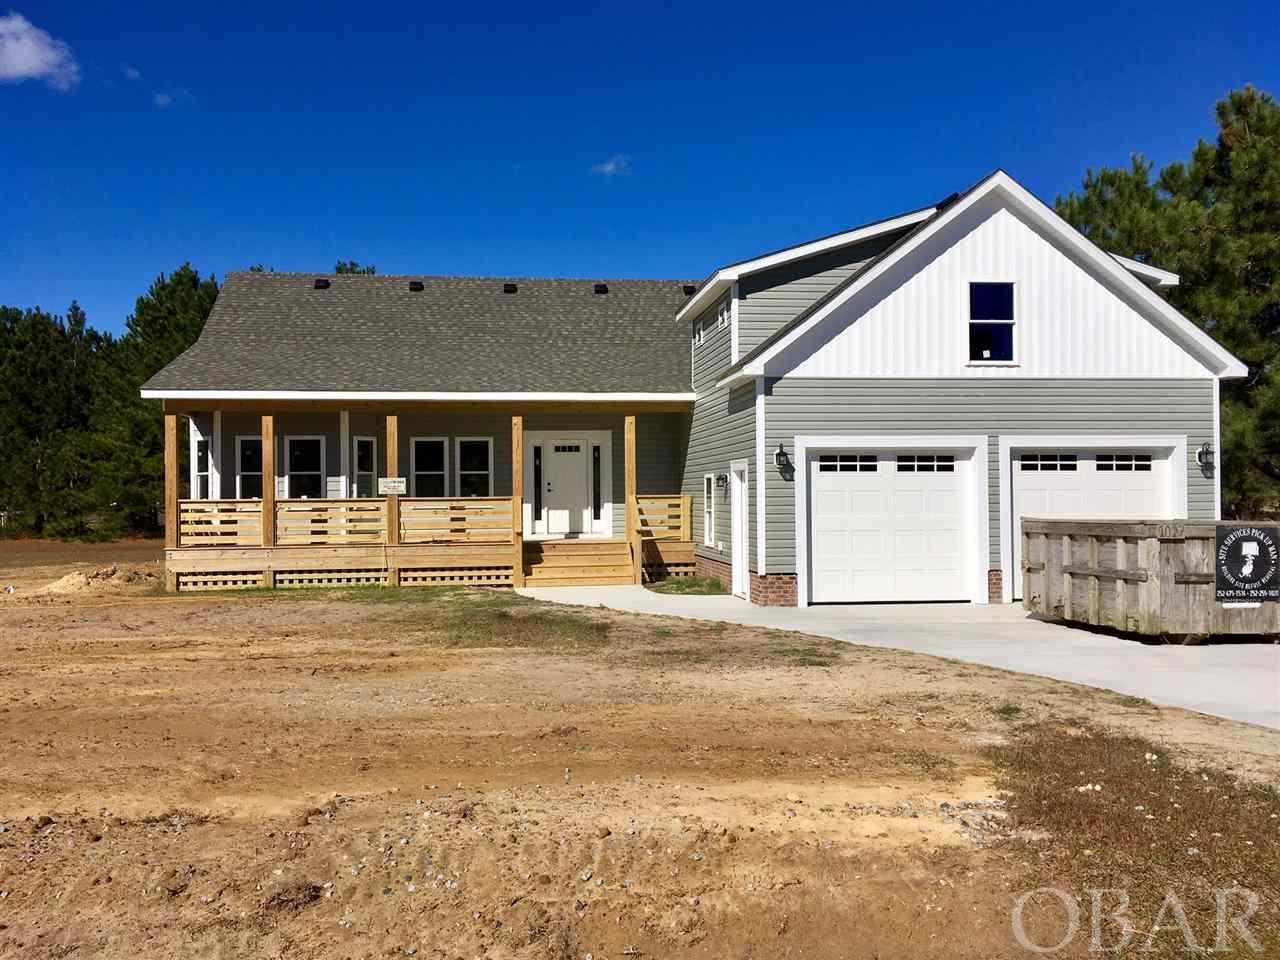 118 Charleston Drive Lot 190 Outer Banks Home Listings - Holleay Parcker - Spinnaker Realty Outer Banks (OBX) Real Estate